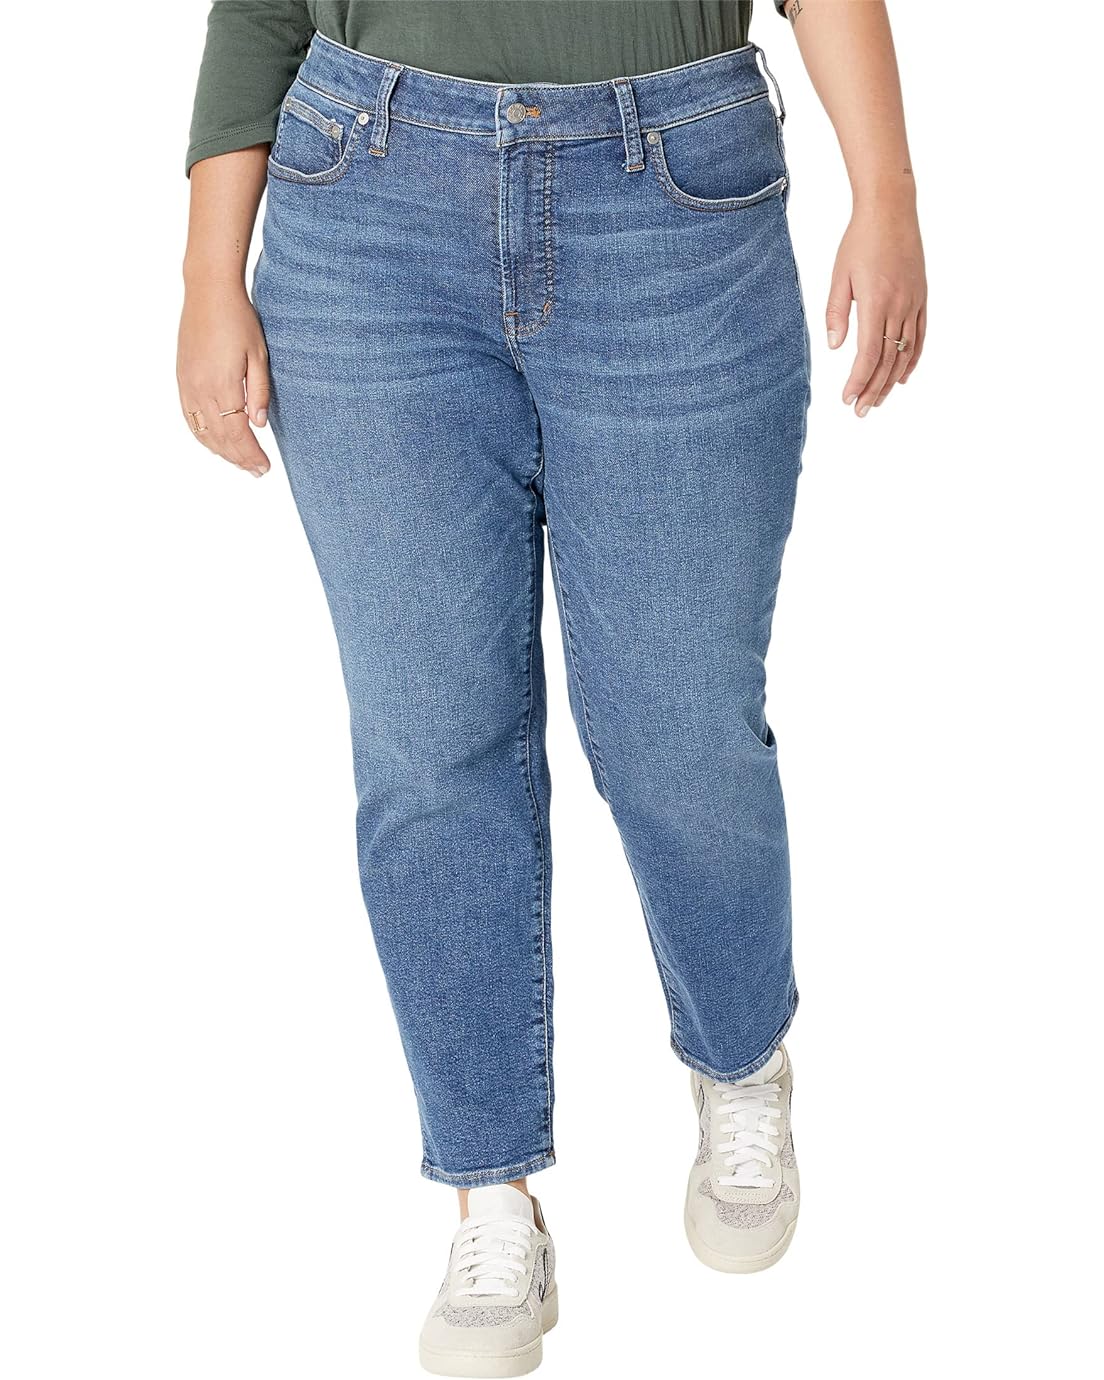 Madewell The Plus Mid-Rise Perfect Vintage Jean in Colwyn Wash